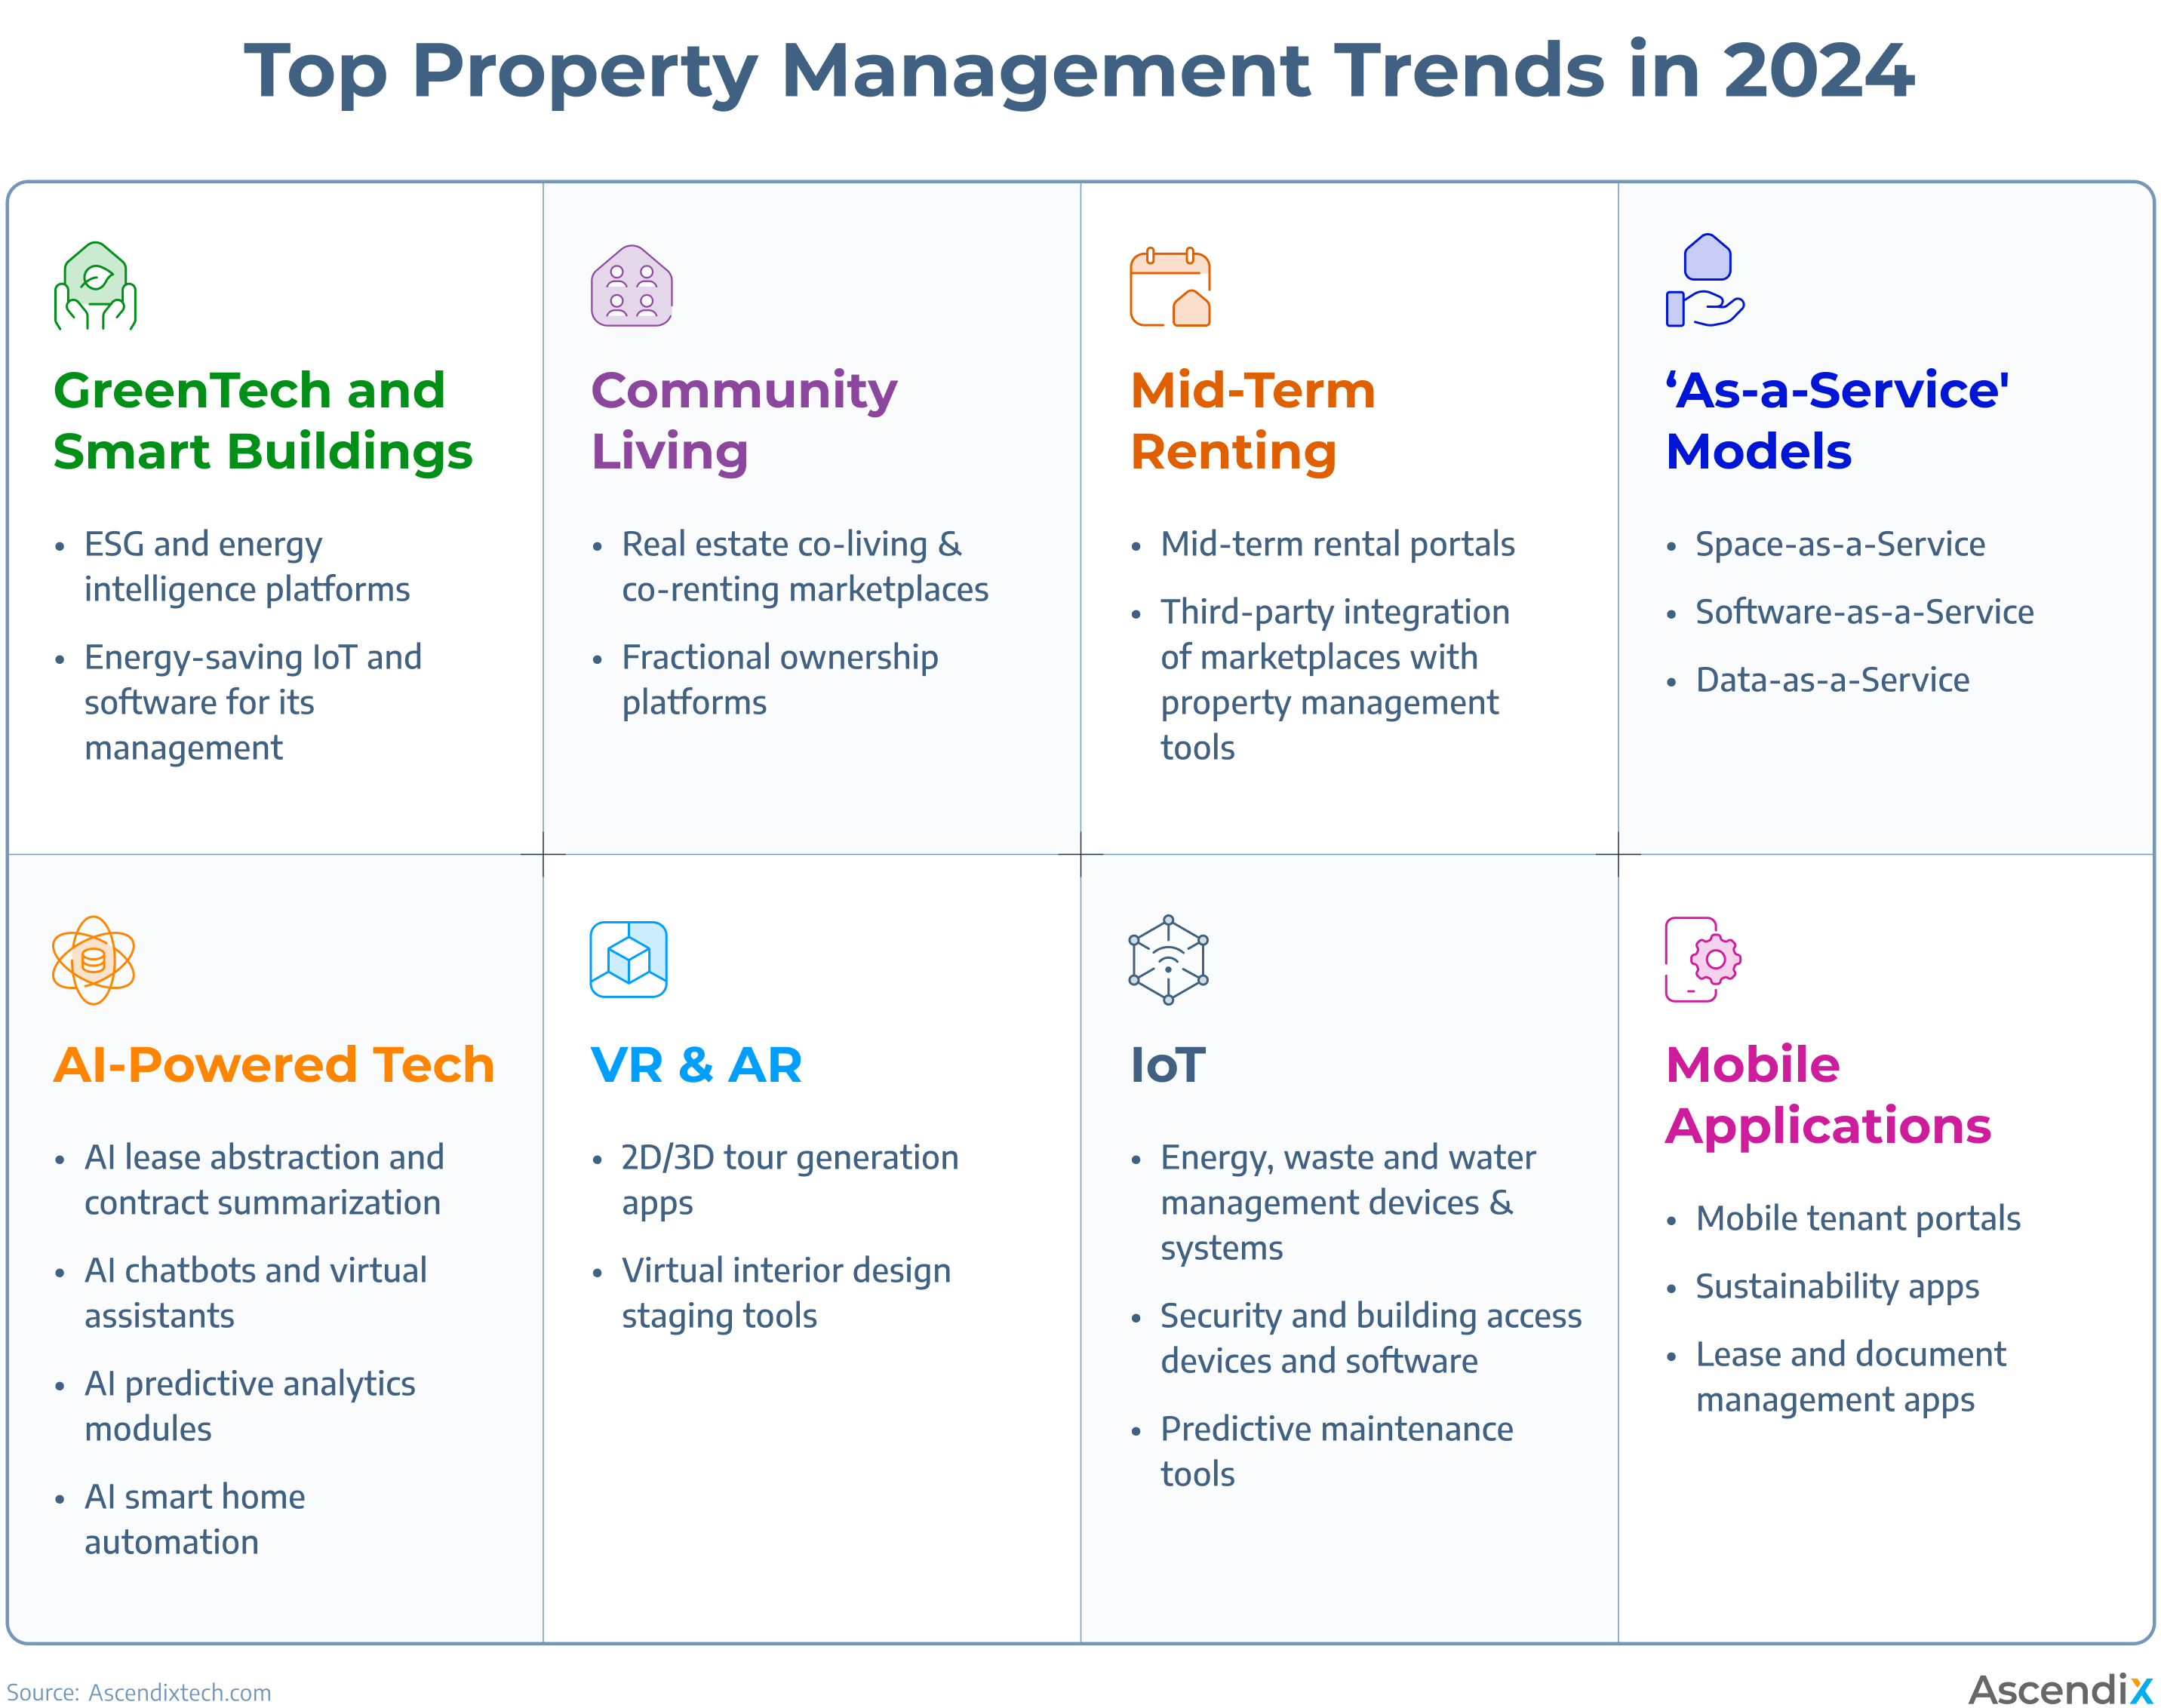 Top Property Management Trends in 2024